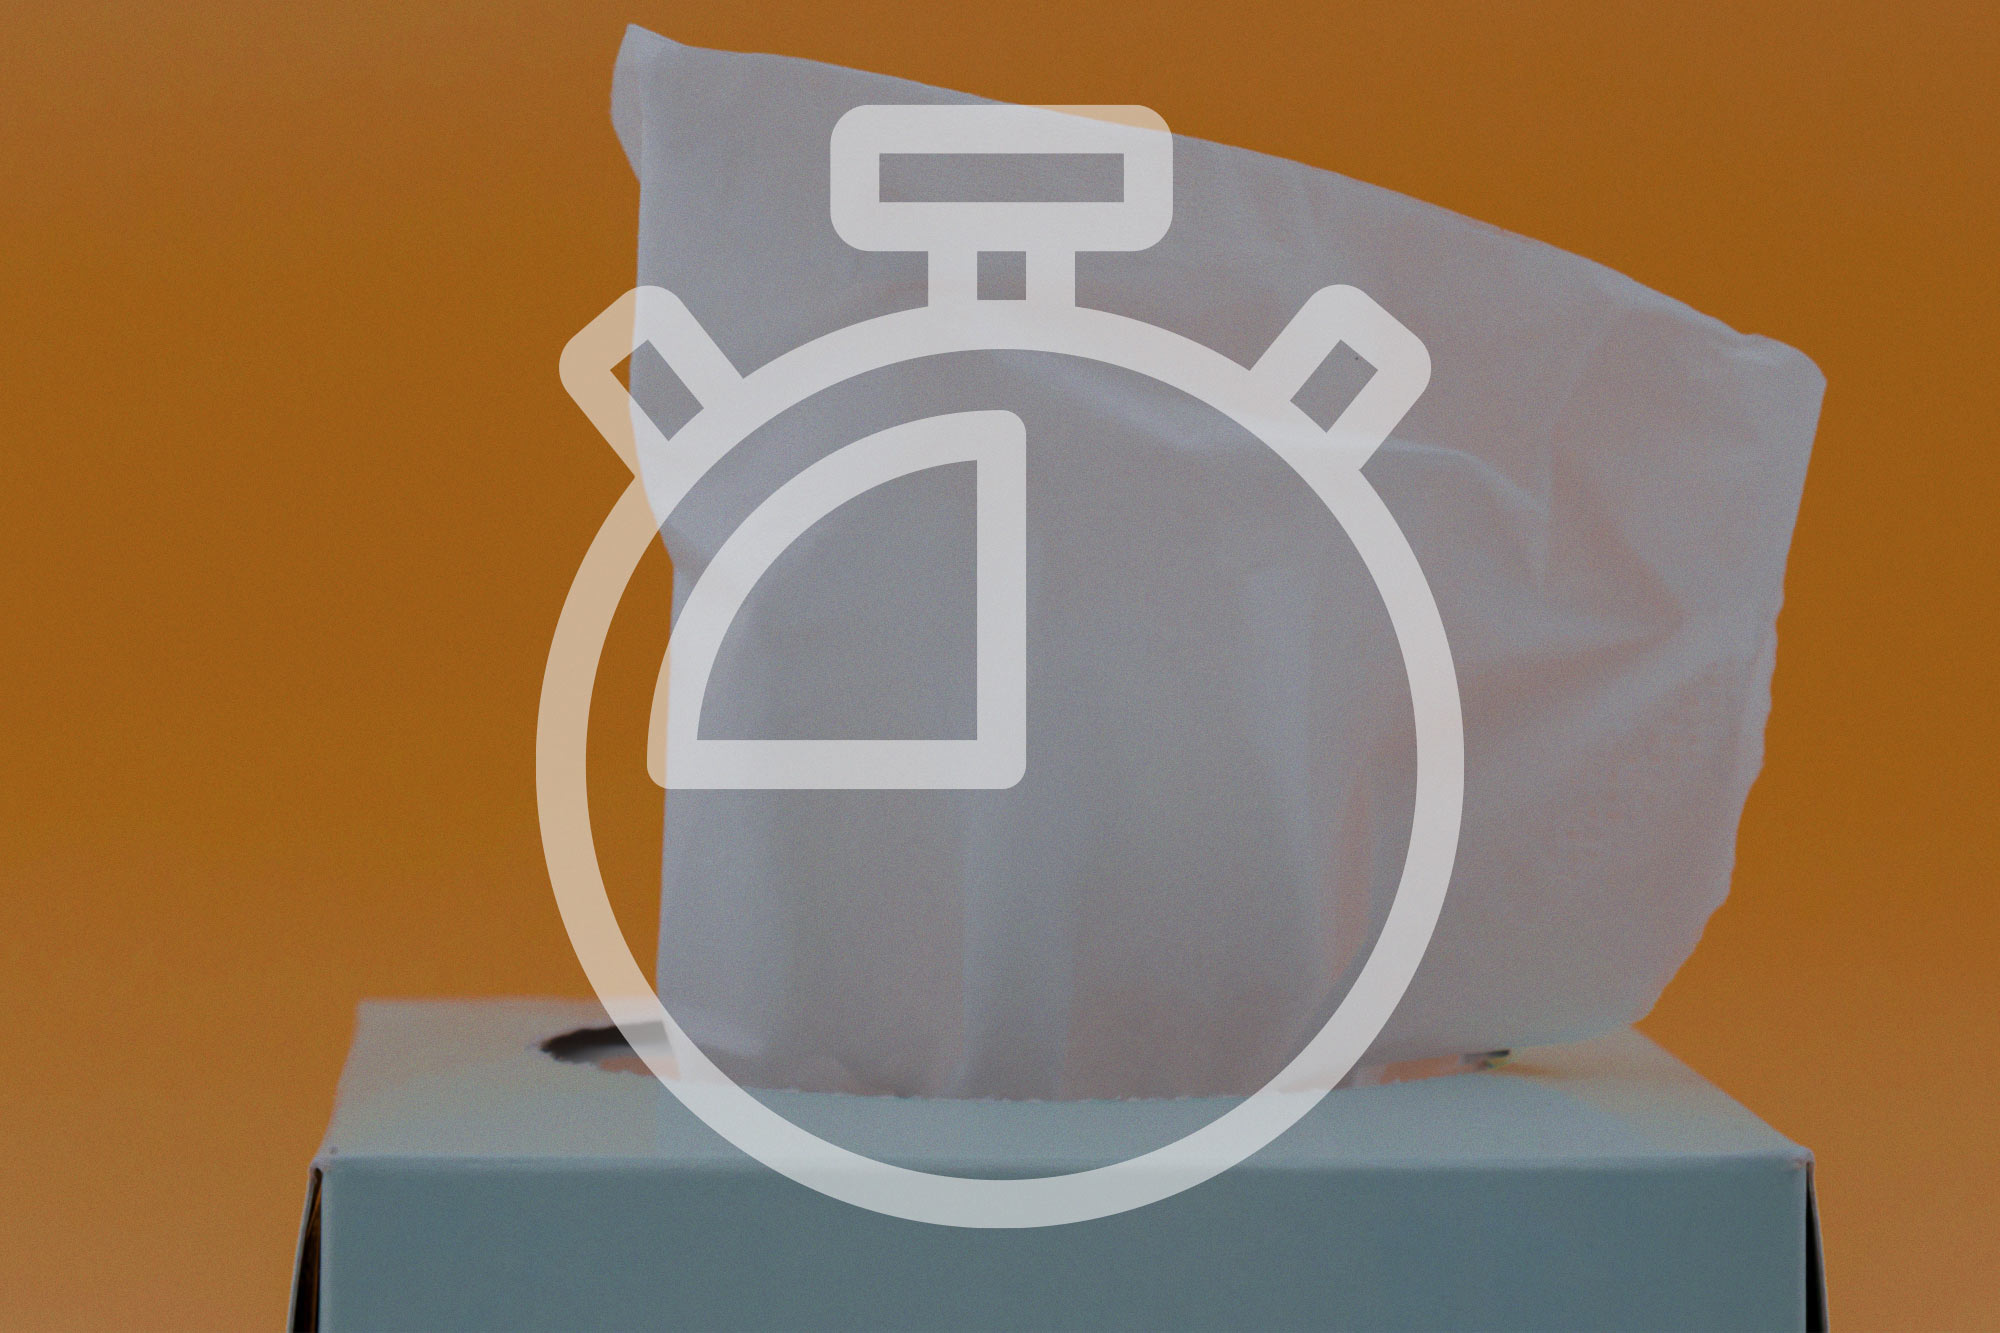 Illustration of a stopwatch over a box of tissues